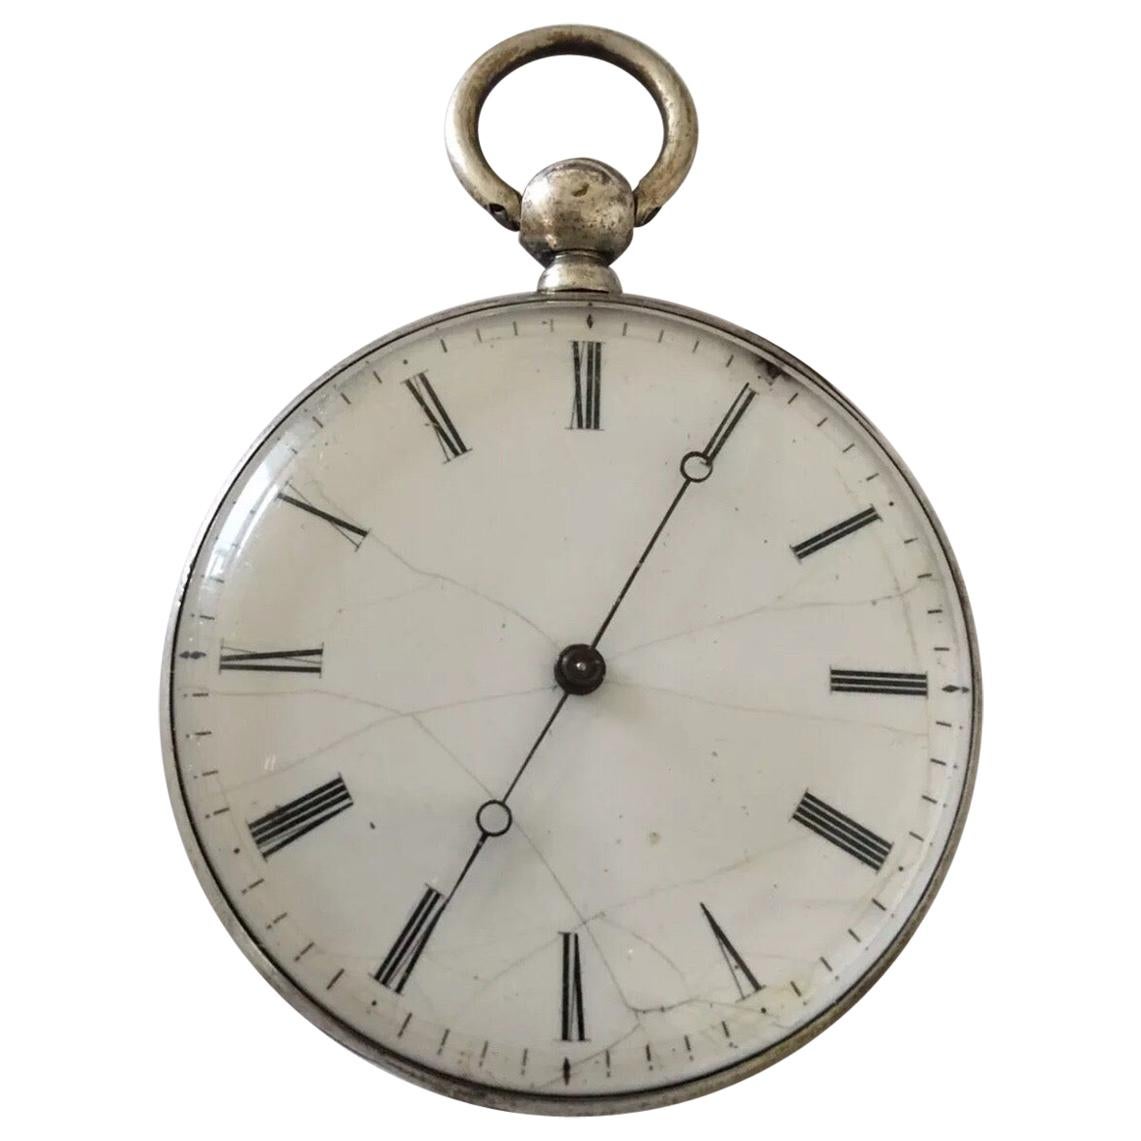 Antique Silver Key-Wind Pocket Watch with Very Fine Hands